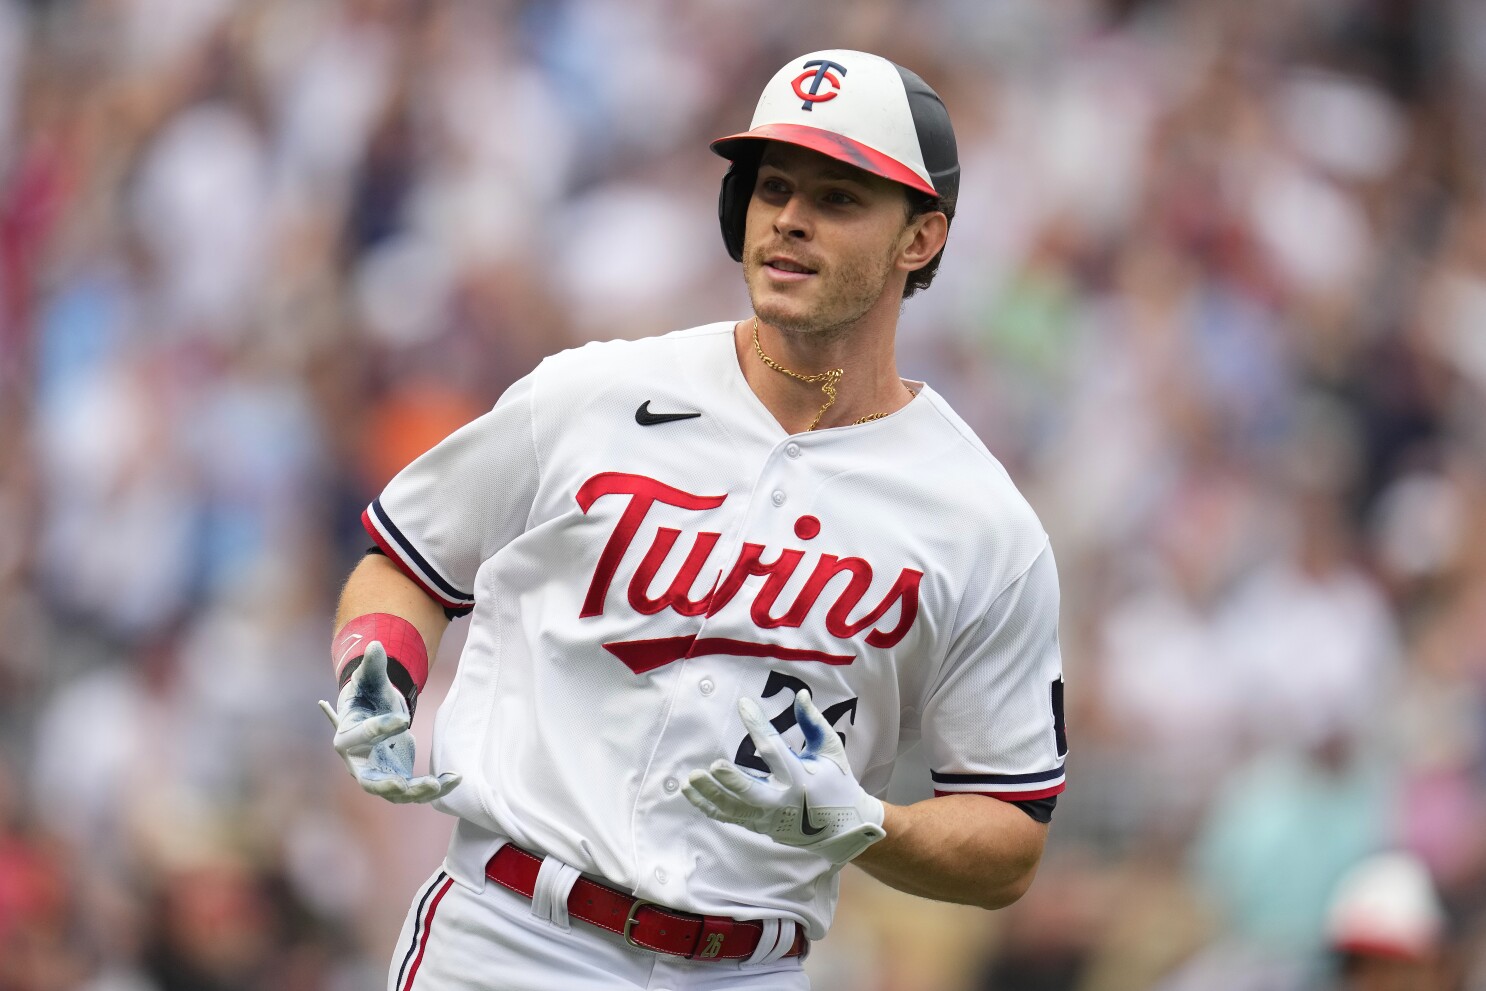 Twins beat Mets 8-4 as Max Kepler and Kyle Farmer lead barrage of